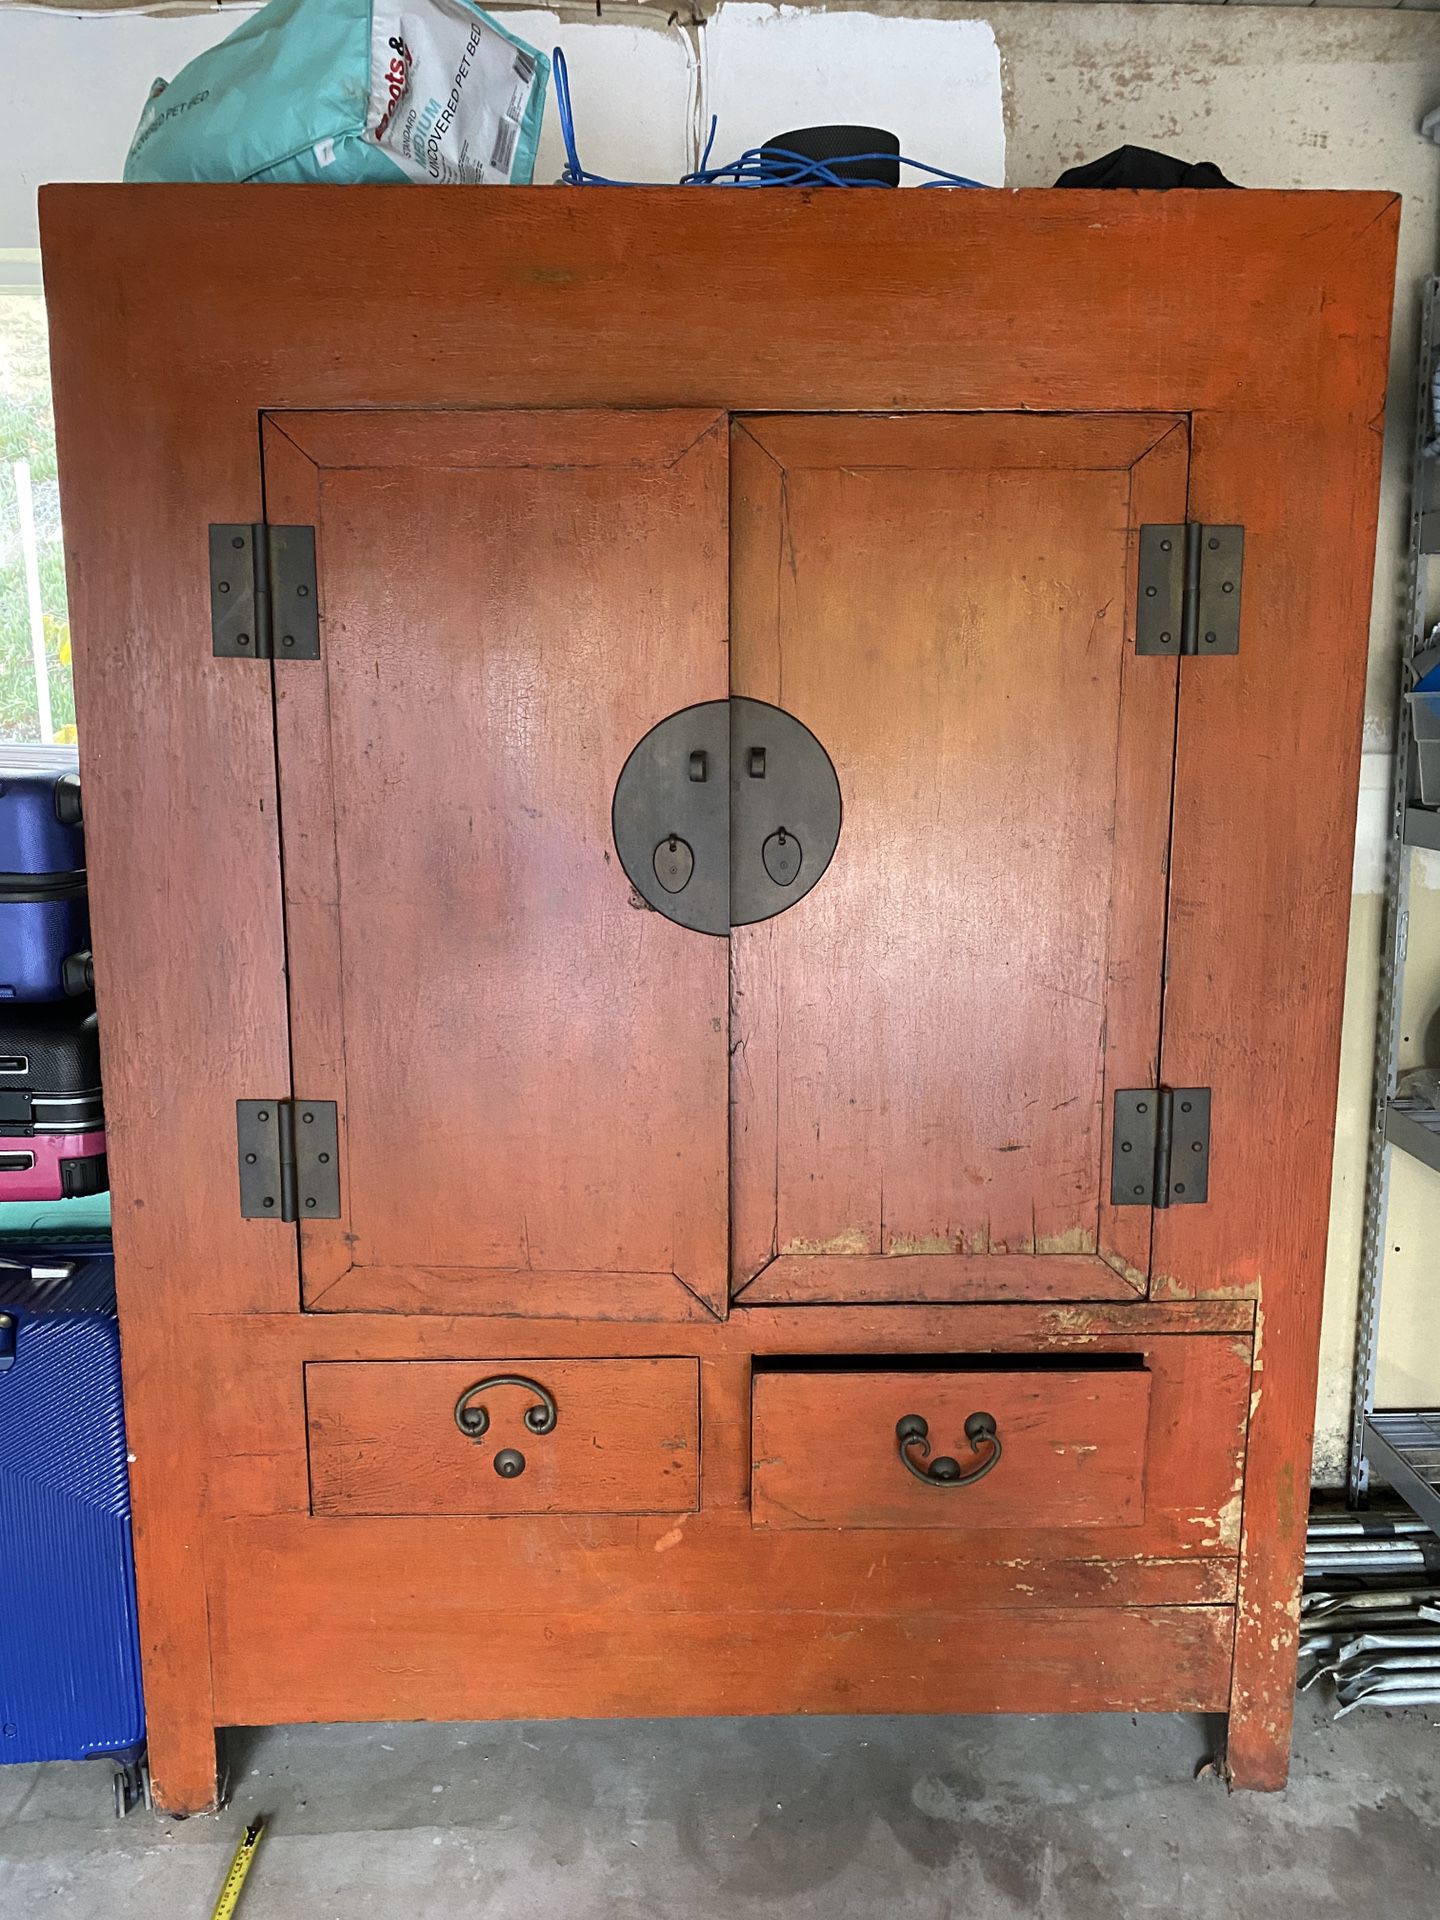 Old - Asian Armoire *antique* Cabinet* 